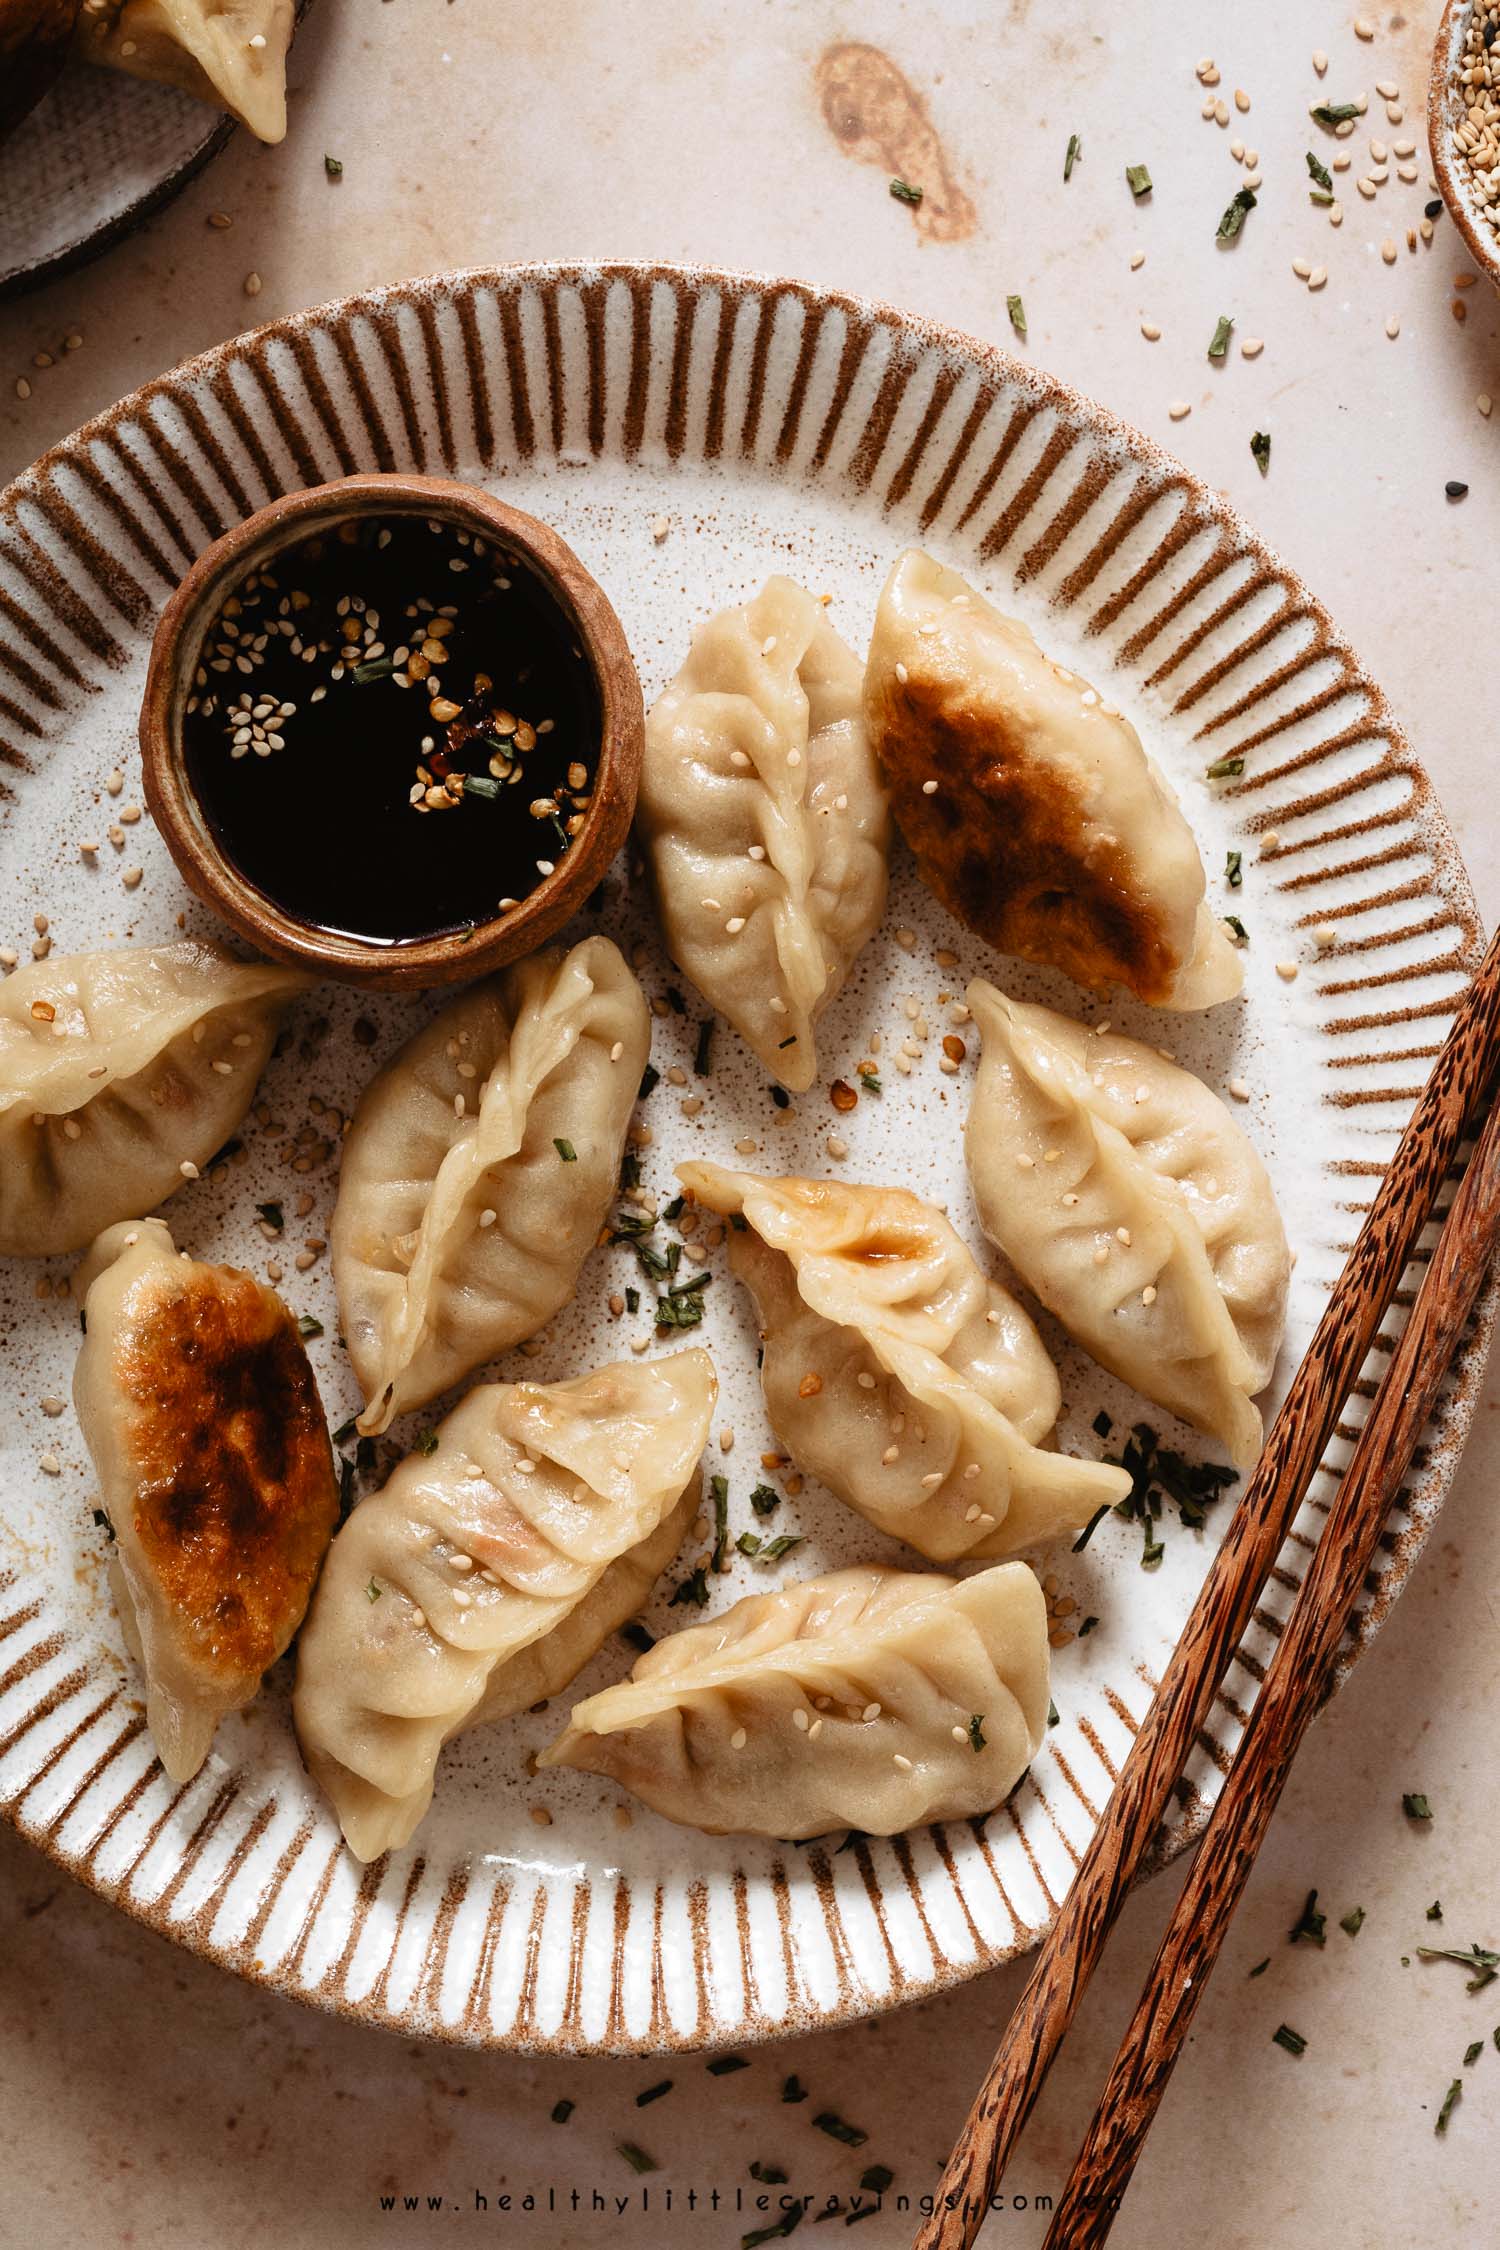 Easy Chicken Potstickers With Dipping Sauce,What Is Chicken Gizzards Good For